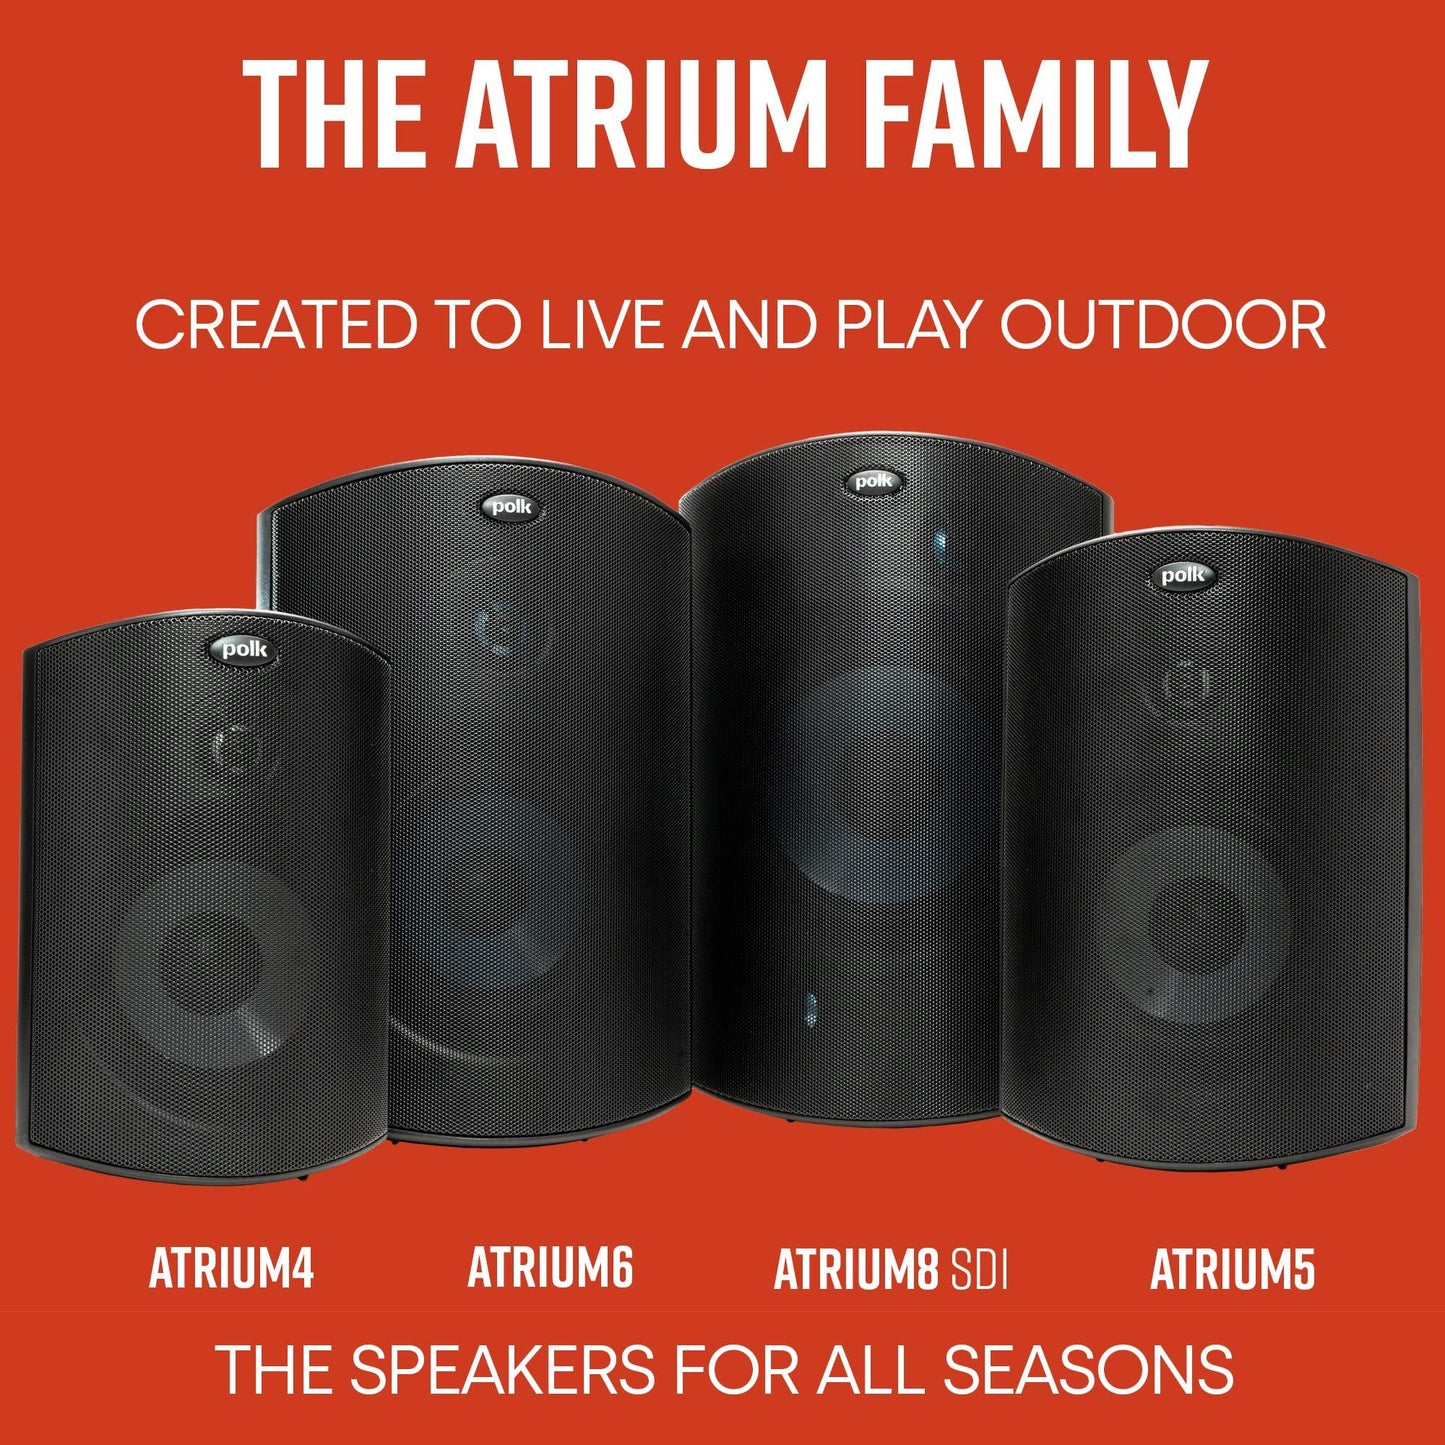 Polk Audio Atrium 5 Outdoor Speakers with Powerful Bass (Pair, Black), All-Weather Durability, Broad Sound Coverage, Speed-Lock Mounting System - CookCave